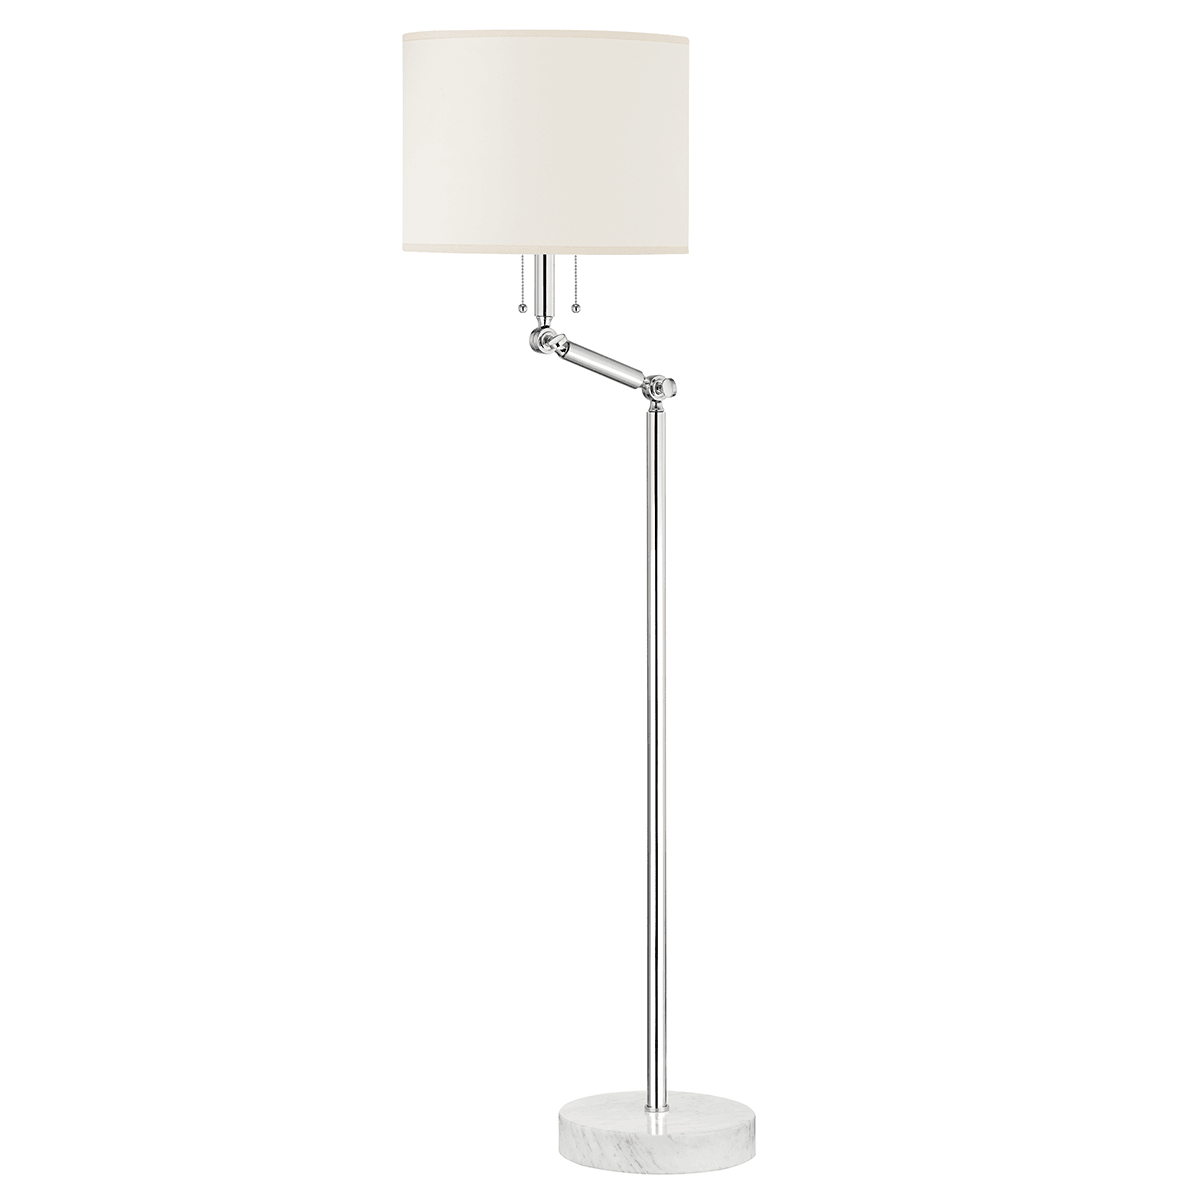 Steel with Adjustable Arm with Fabric Shade Floor Lamp - LV LIGHTING